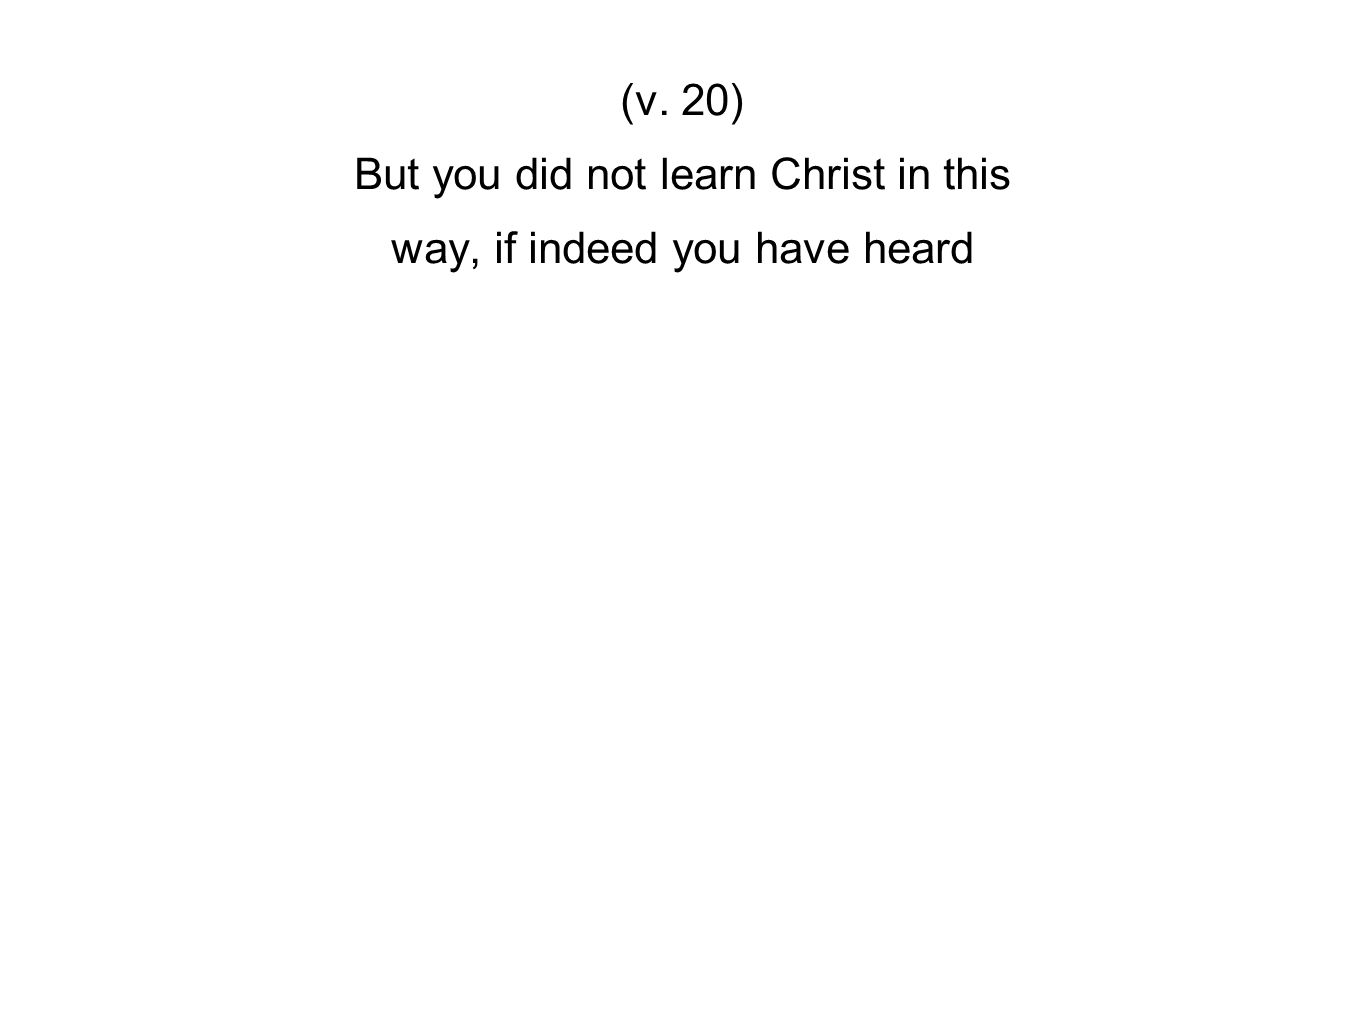 (v. 20) But you did not learn Christ in this way, if indeed you have heard